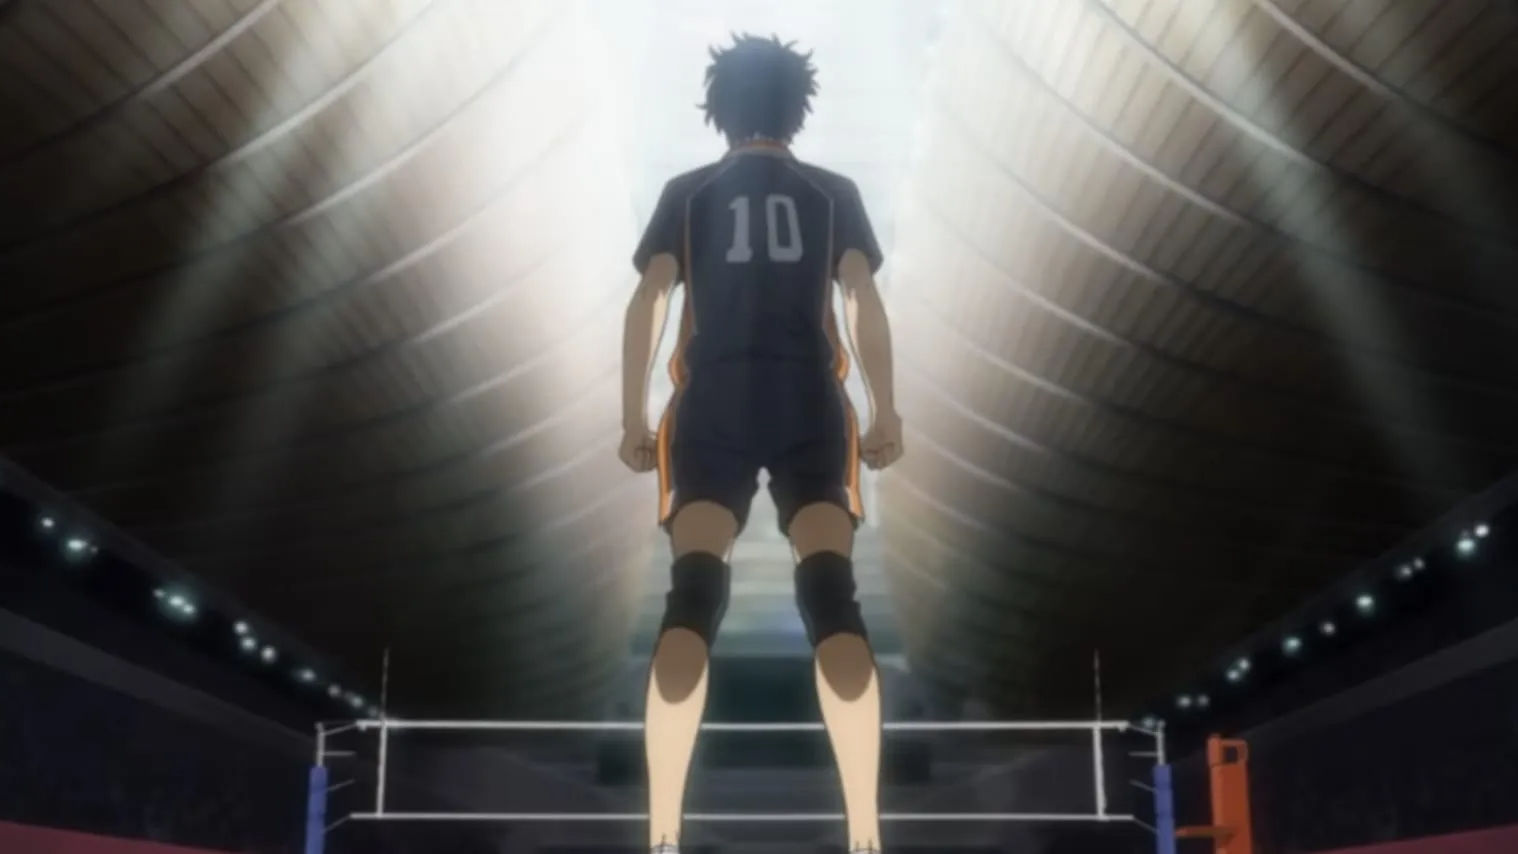 Haikyuus surprise cameo during Tokyo Olympics volleyball game